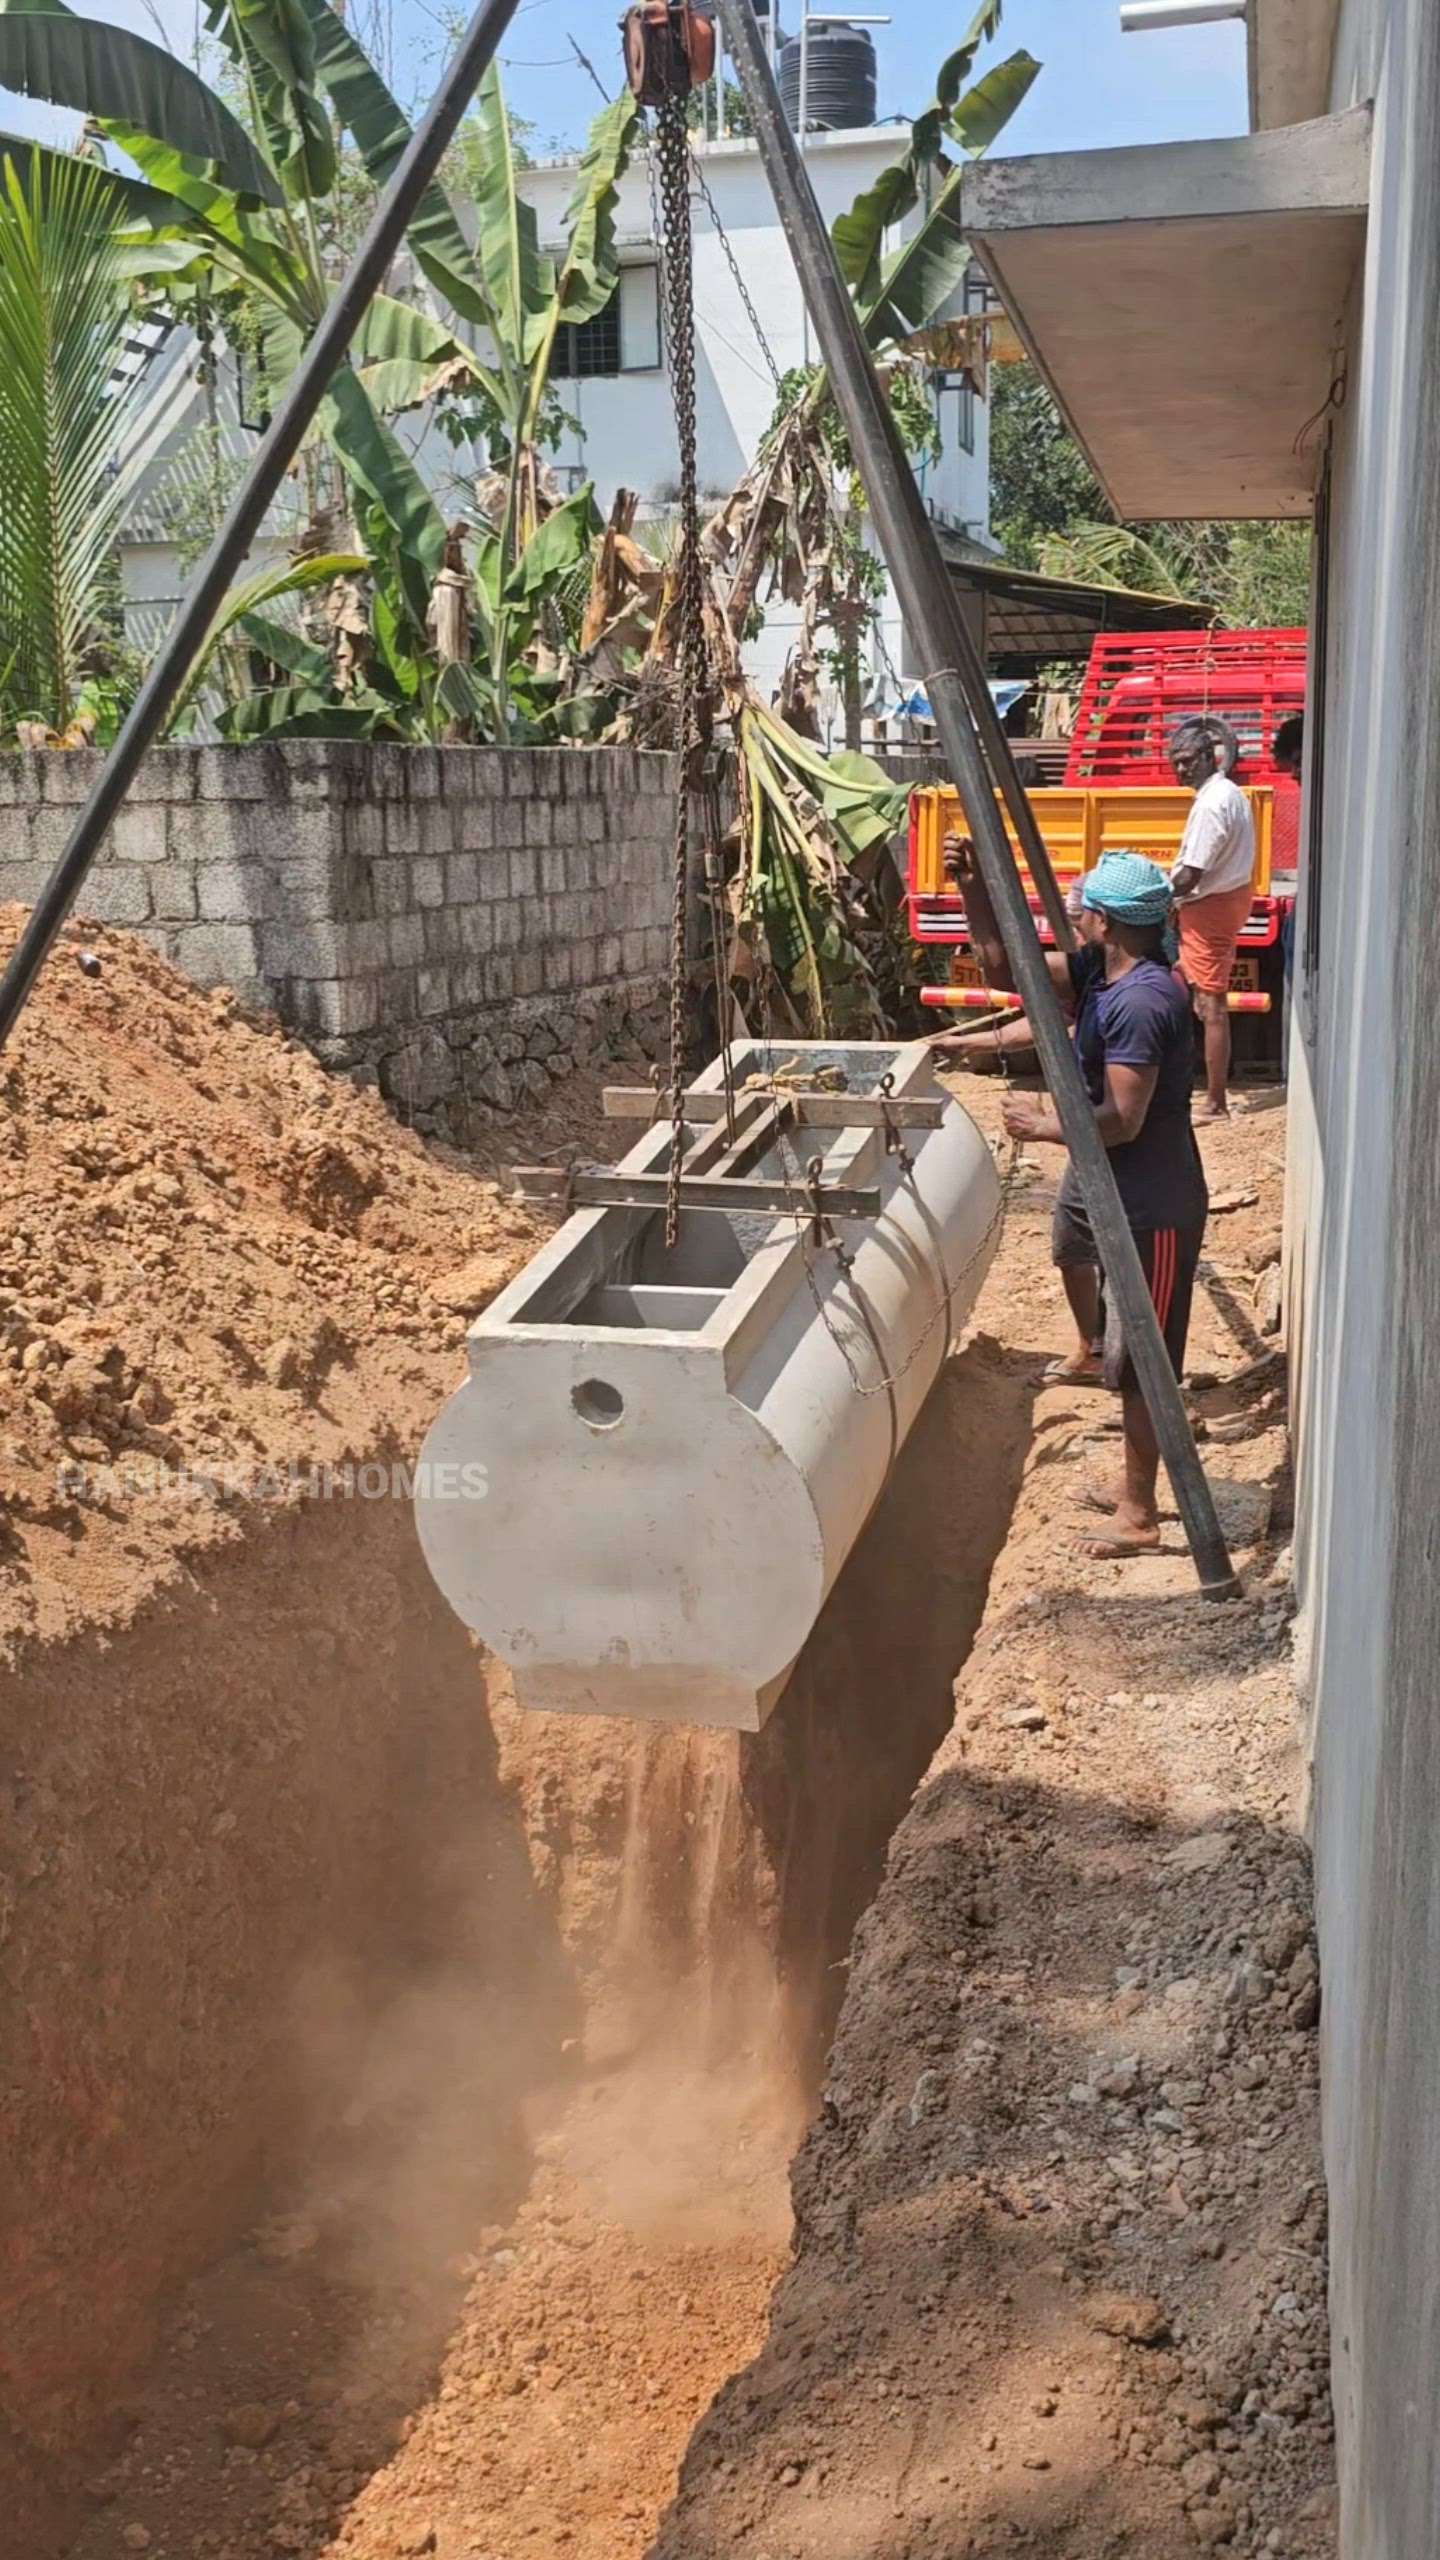 Septic Tank and Open well distance
#septictank #openwell #constructionsite